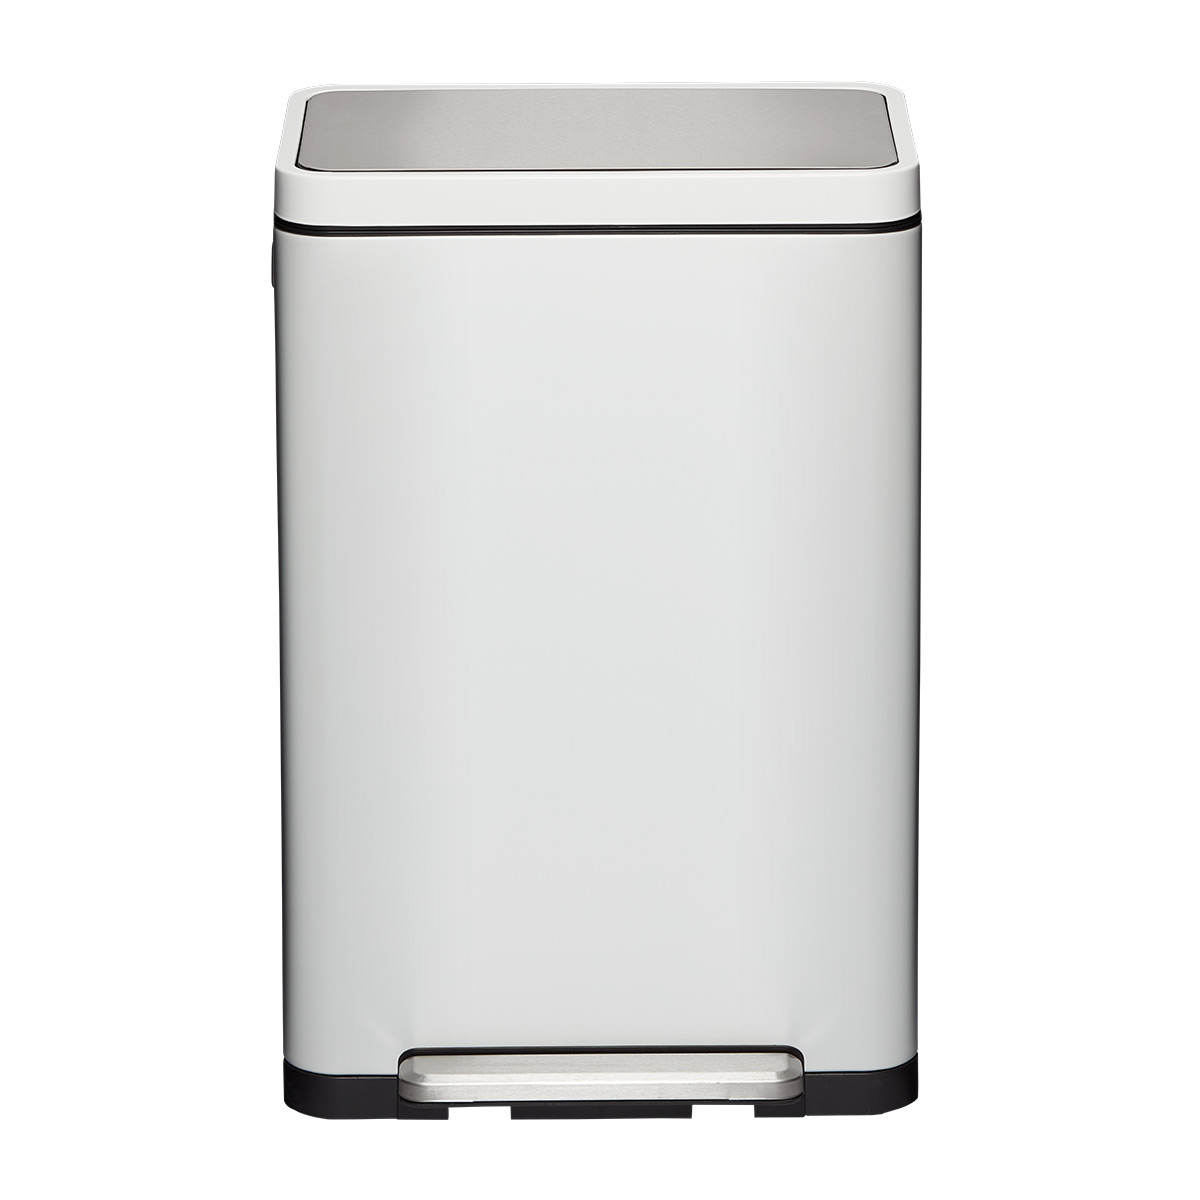 The Container Store 12 gal./ 45L Step Can White